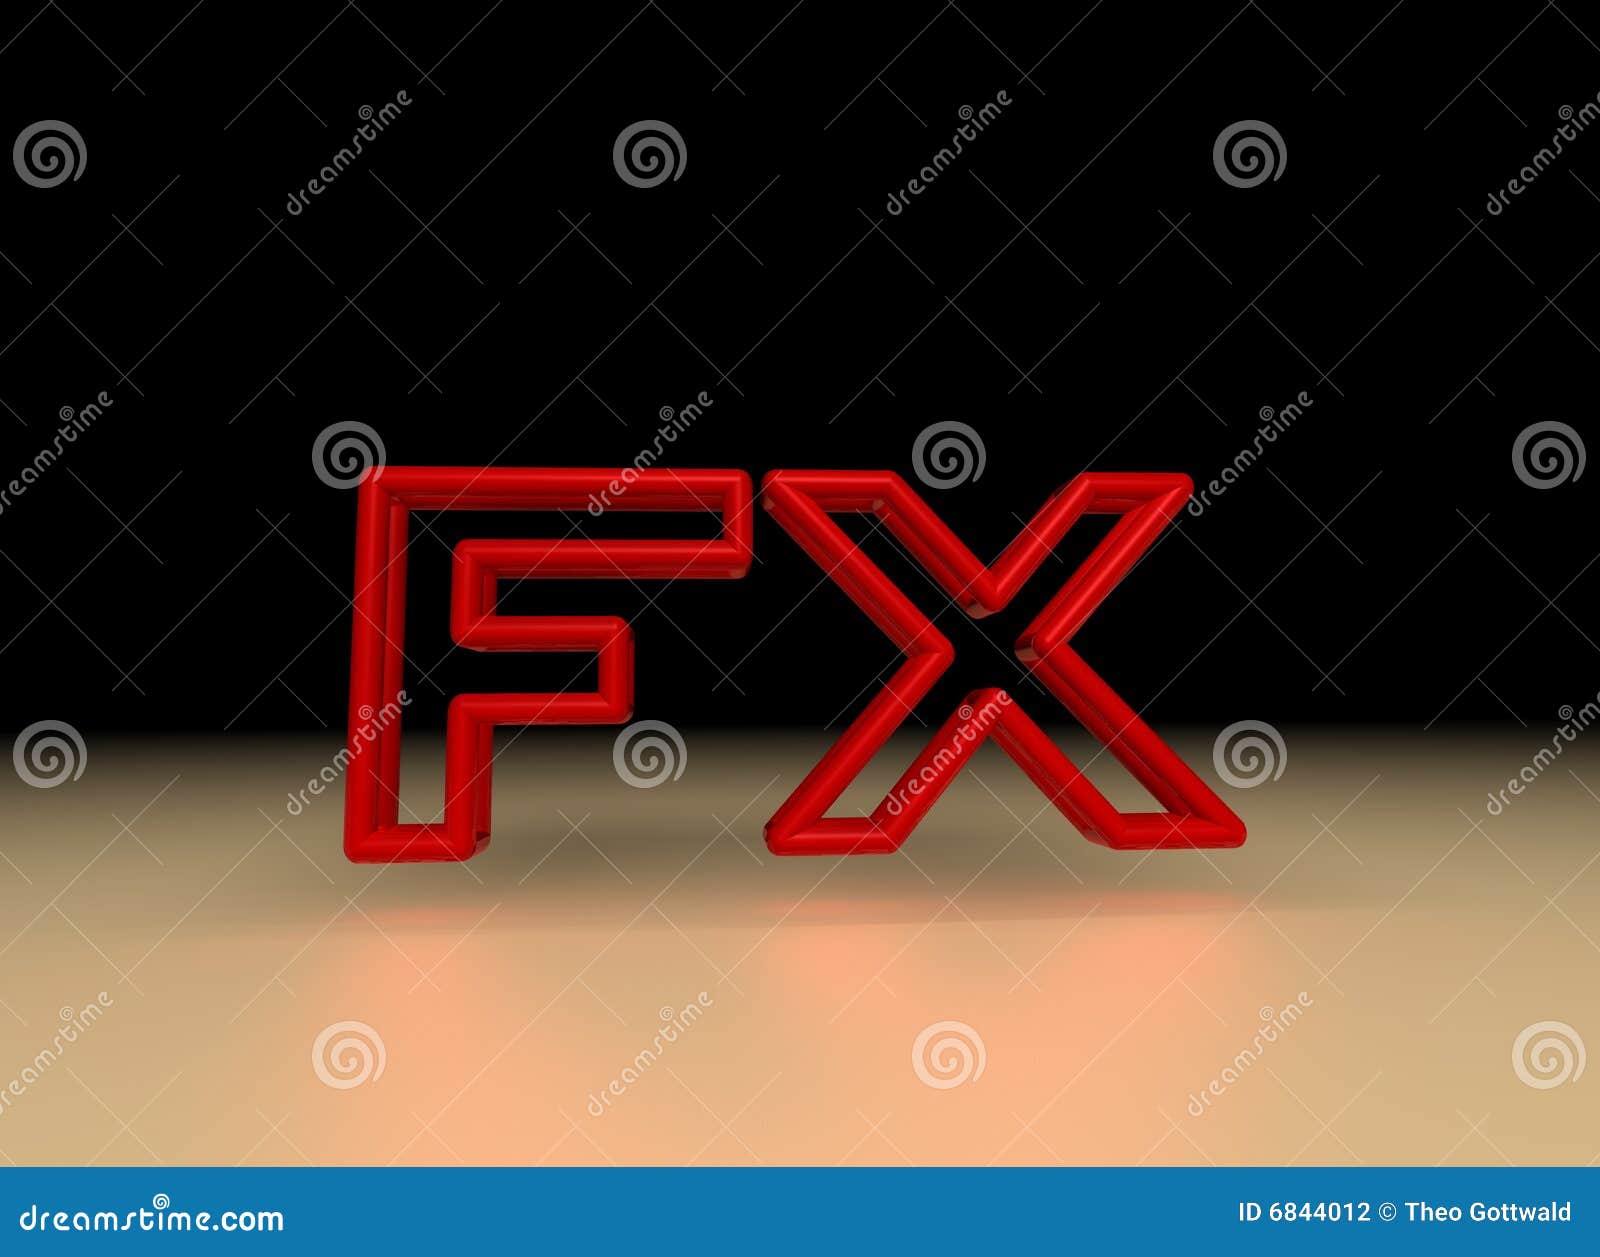 Fx logo letters with blue and red gradation Vector Image